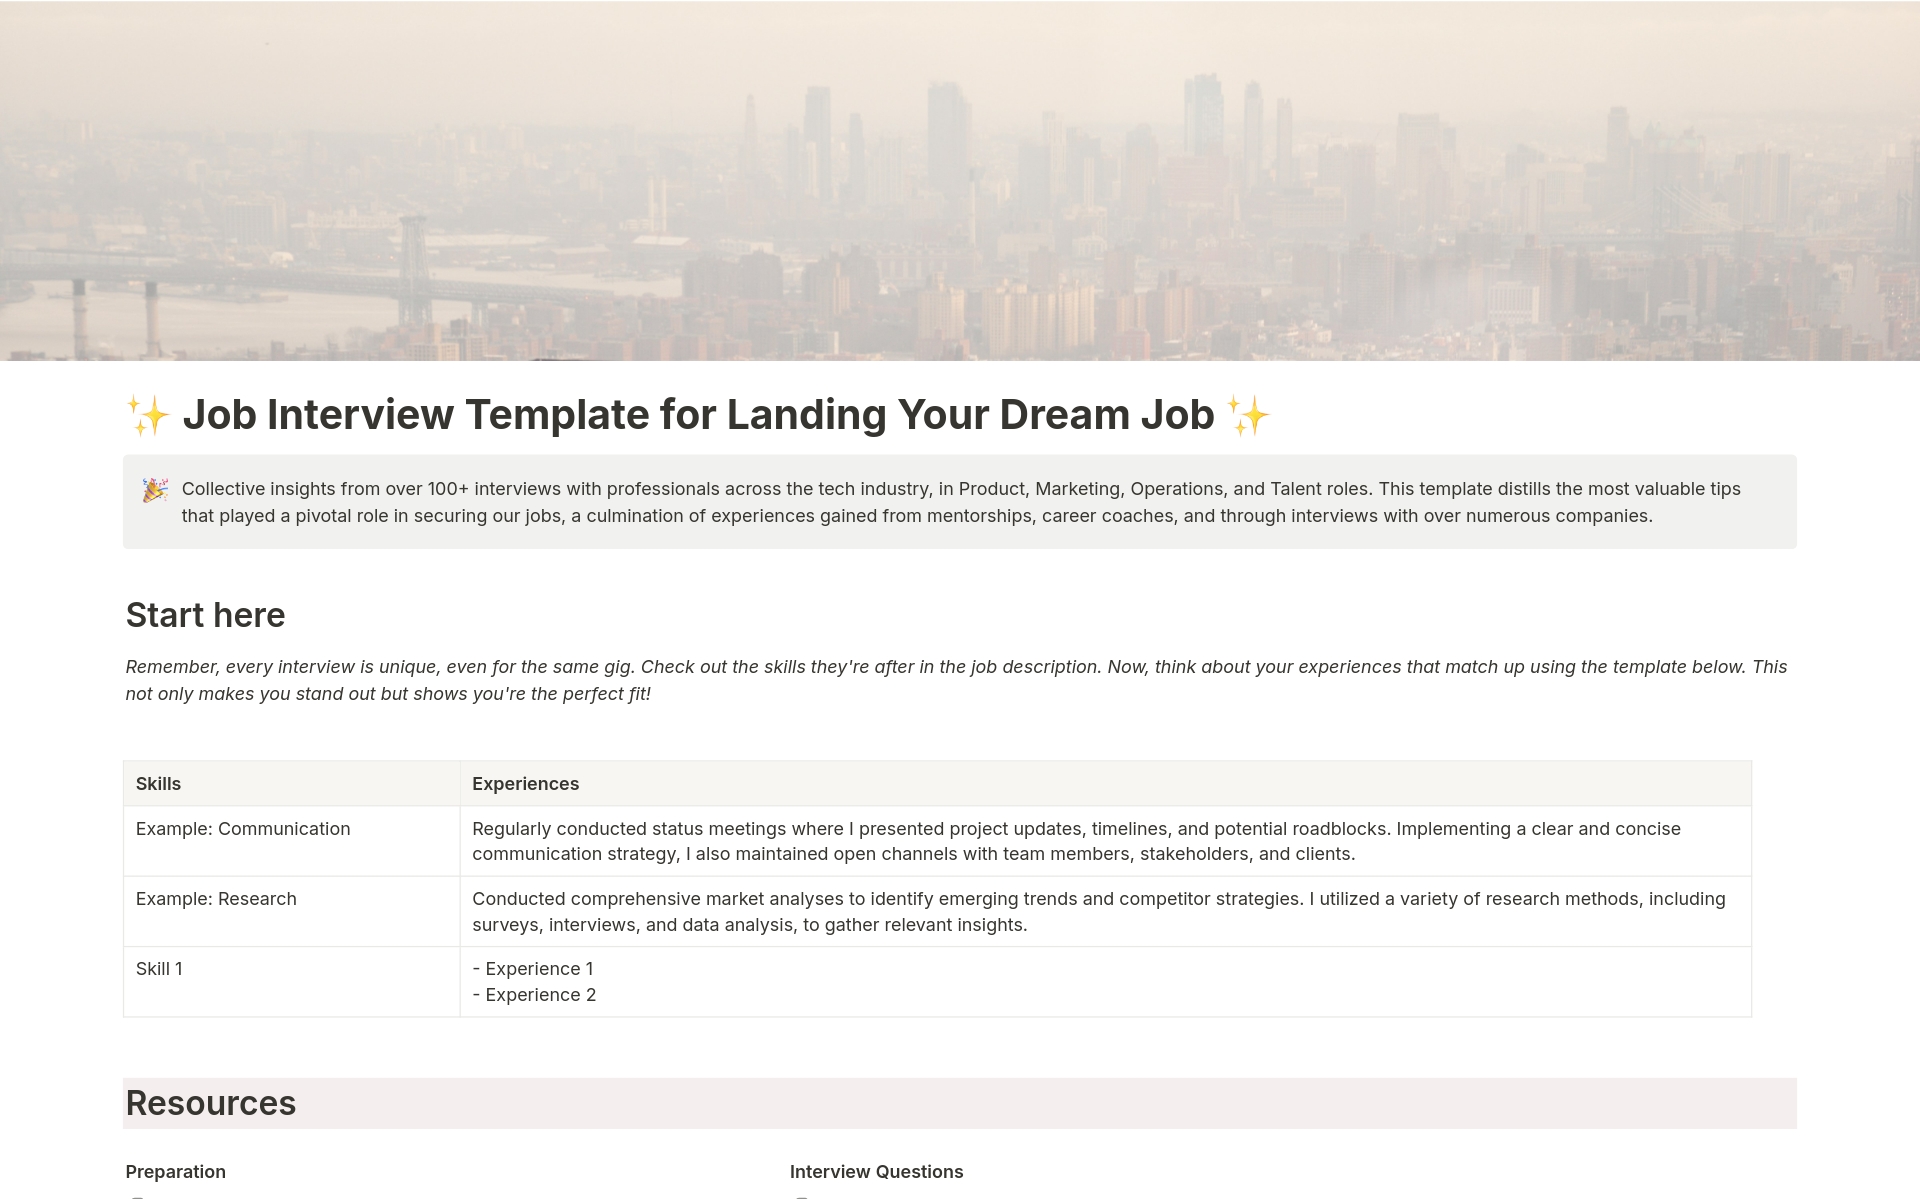 50+ questions and frameworks on how to answer every type of interview question. Questions collected from job interviews with professionals across the tech industry, in Product, Marketing, Operations, and Talent roles.